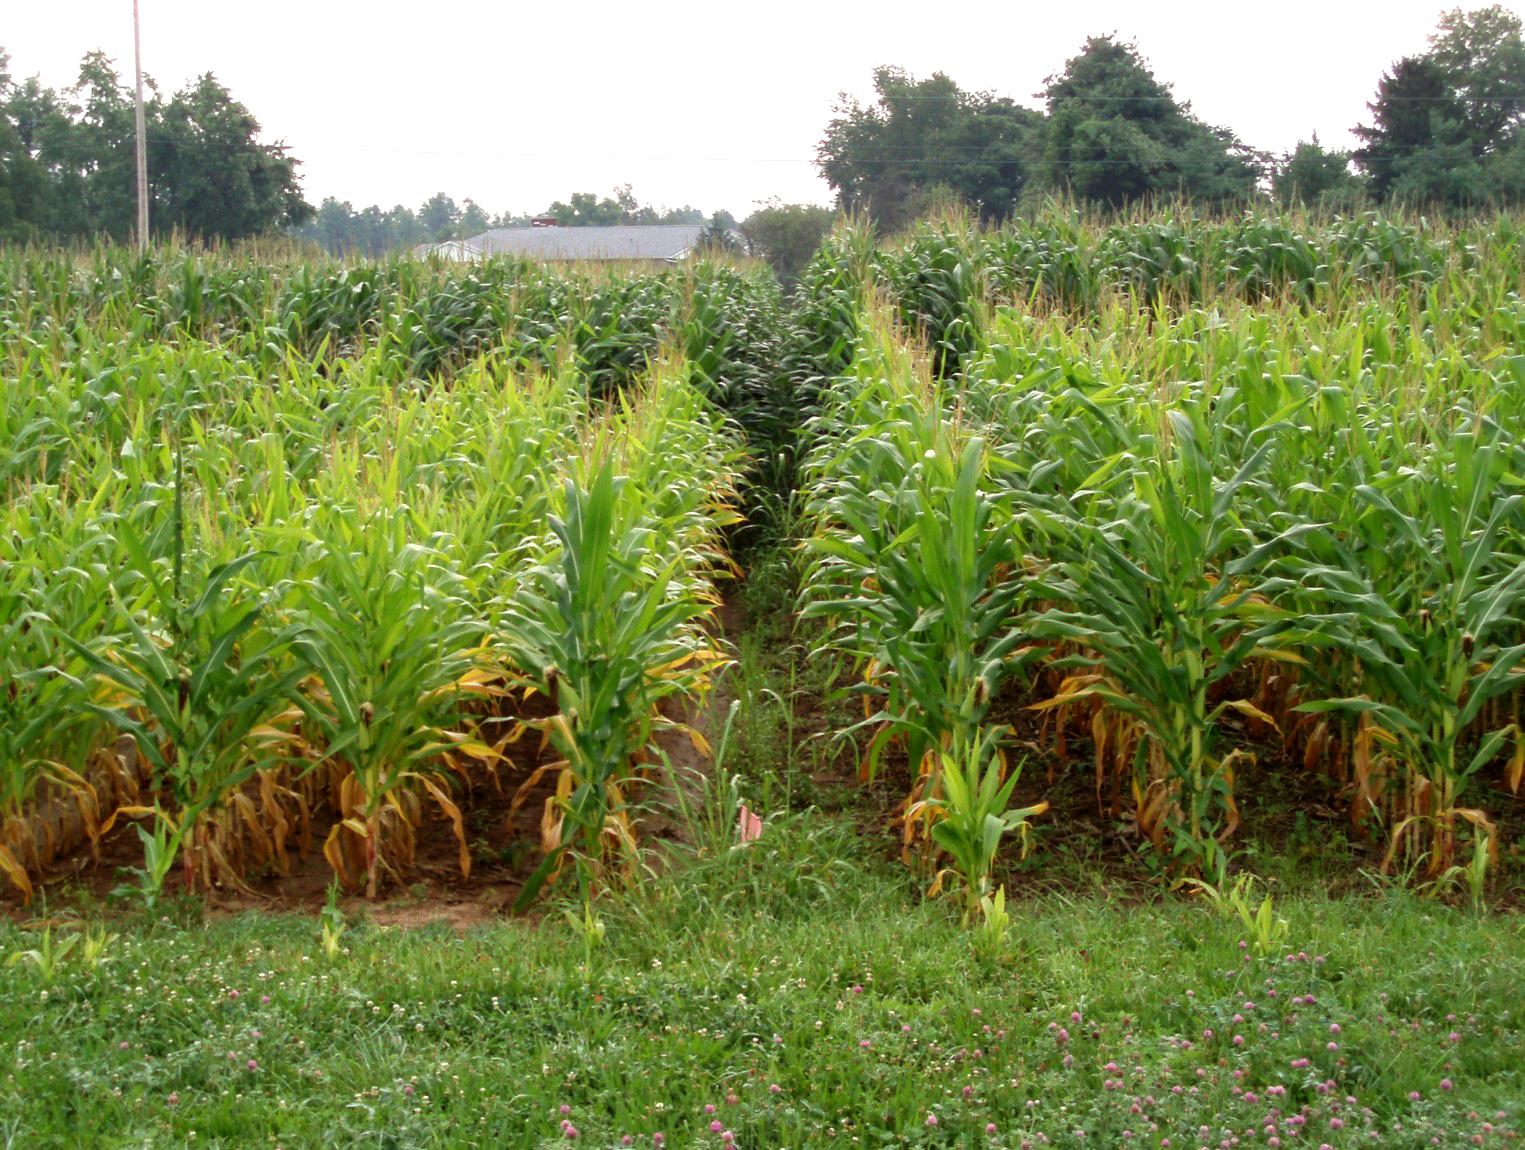 Corn growing in UK's Blevins research plots. Photo courtesy of John Grove, UK soil scientist.